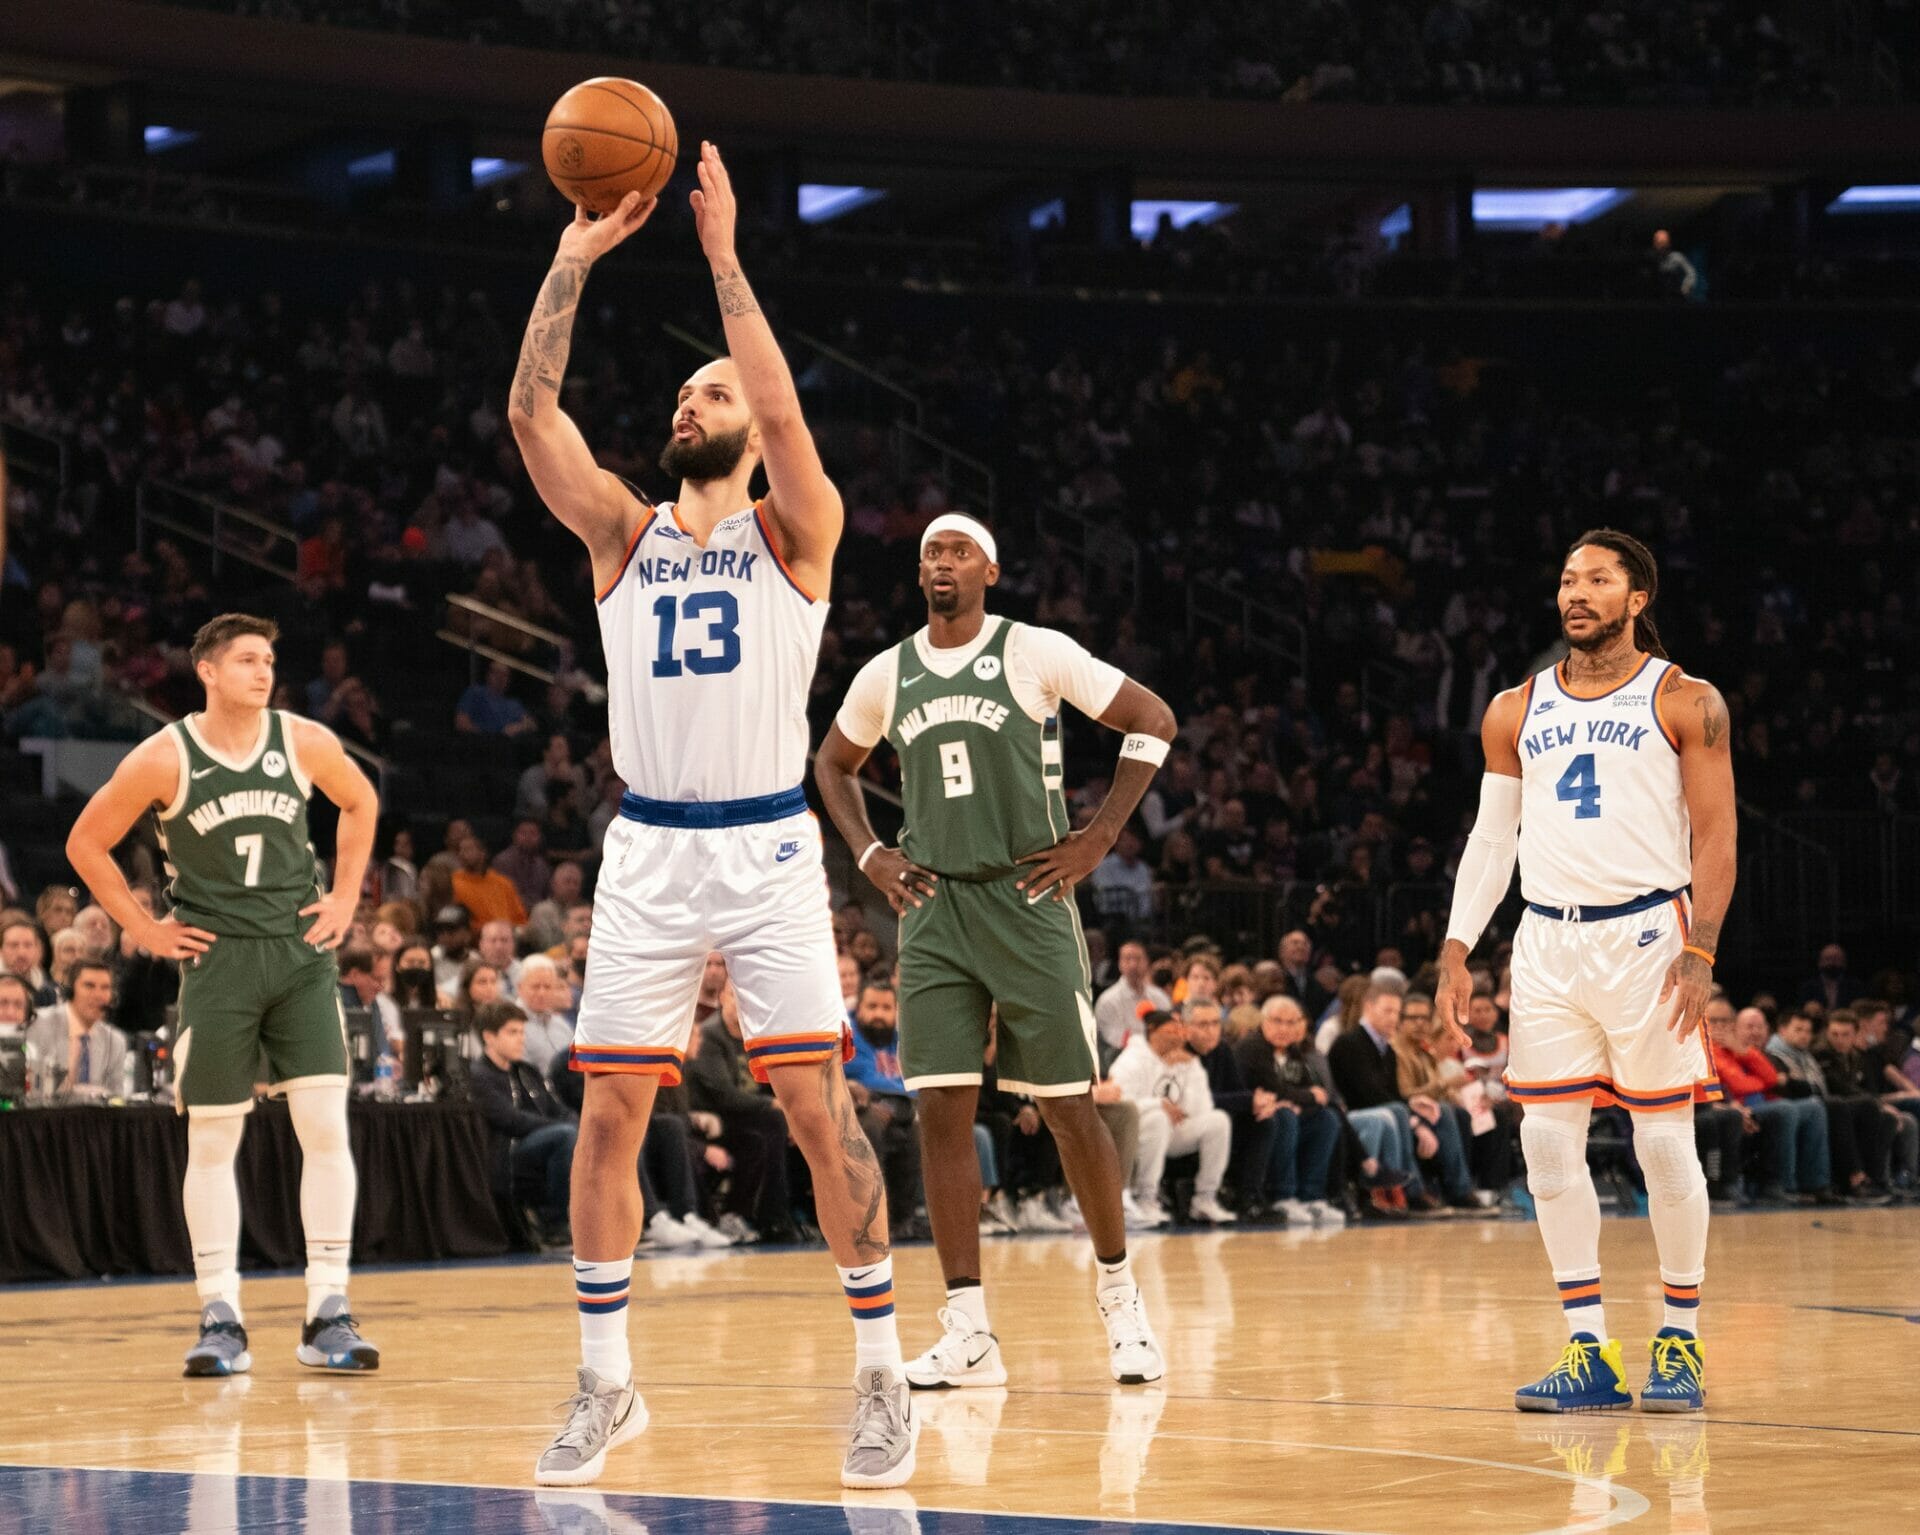 Dec 12, 2021; New York, New York, USA; New York Knicks shooting guard Evan Fournier (13) shoots a technical foul during the first half against the Milwaukee Bucks at Madison Square Garden. Mandatory Credit: Gregory Fisher-USA TODAY Sports (NBA News)